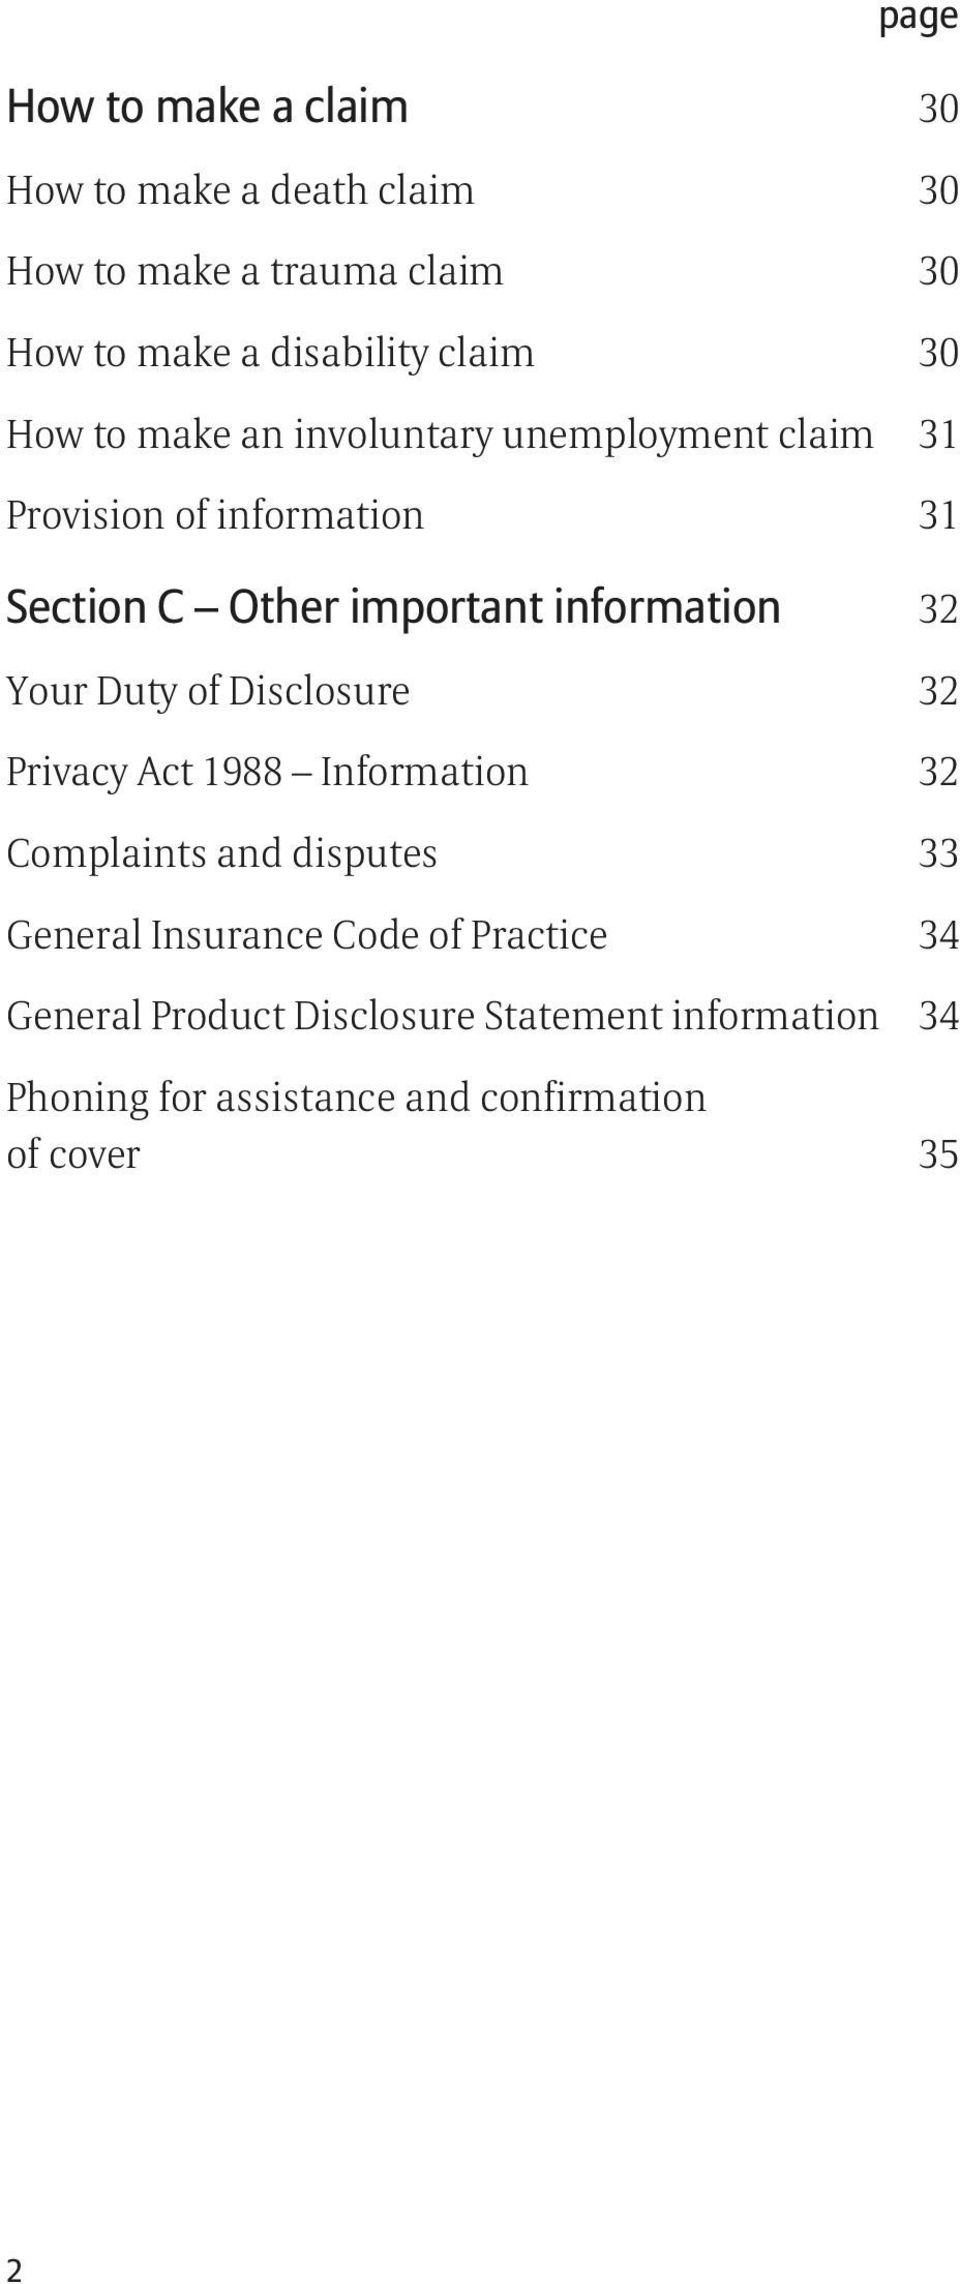 information 32 Your Duty of Disclosure 32 Privacy Act 1988 Information 32 Complaints and disputes 33 General